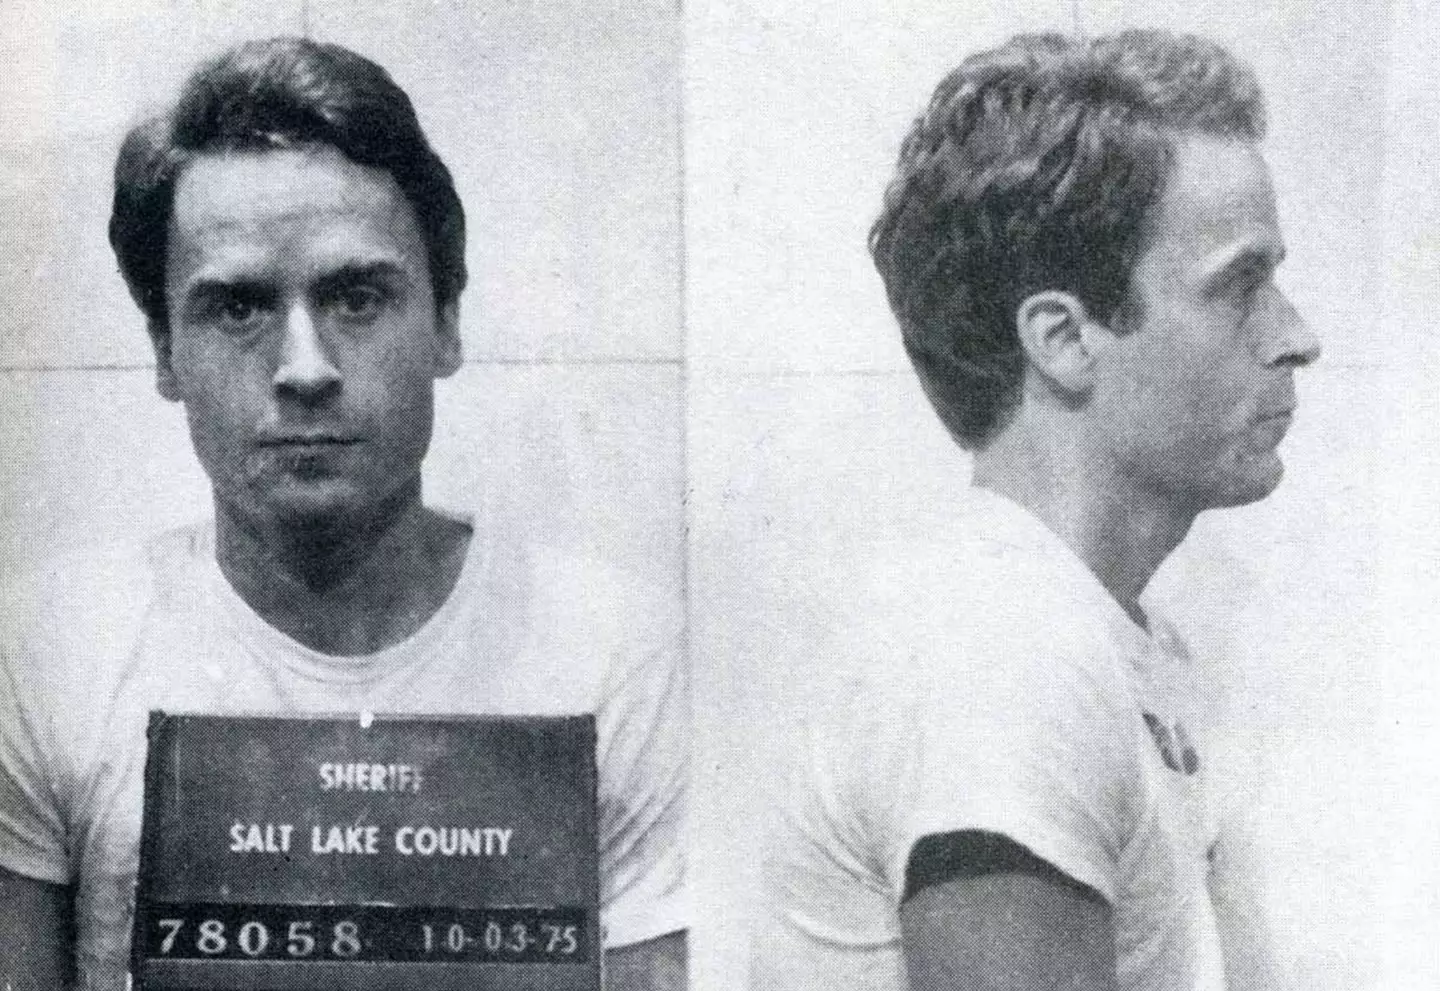 Ted Bundy scored very highly on the test.